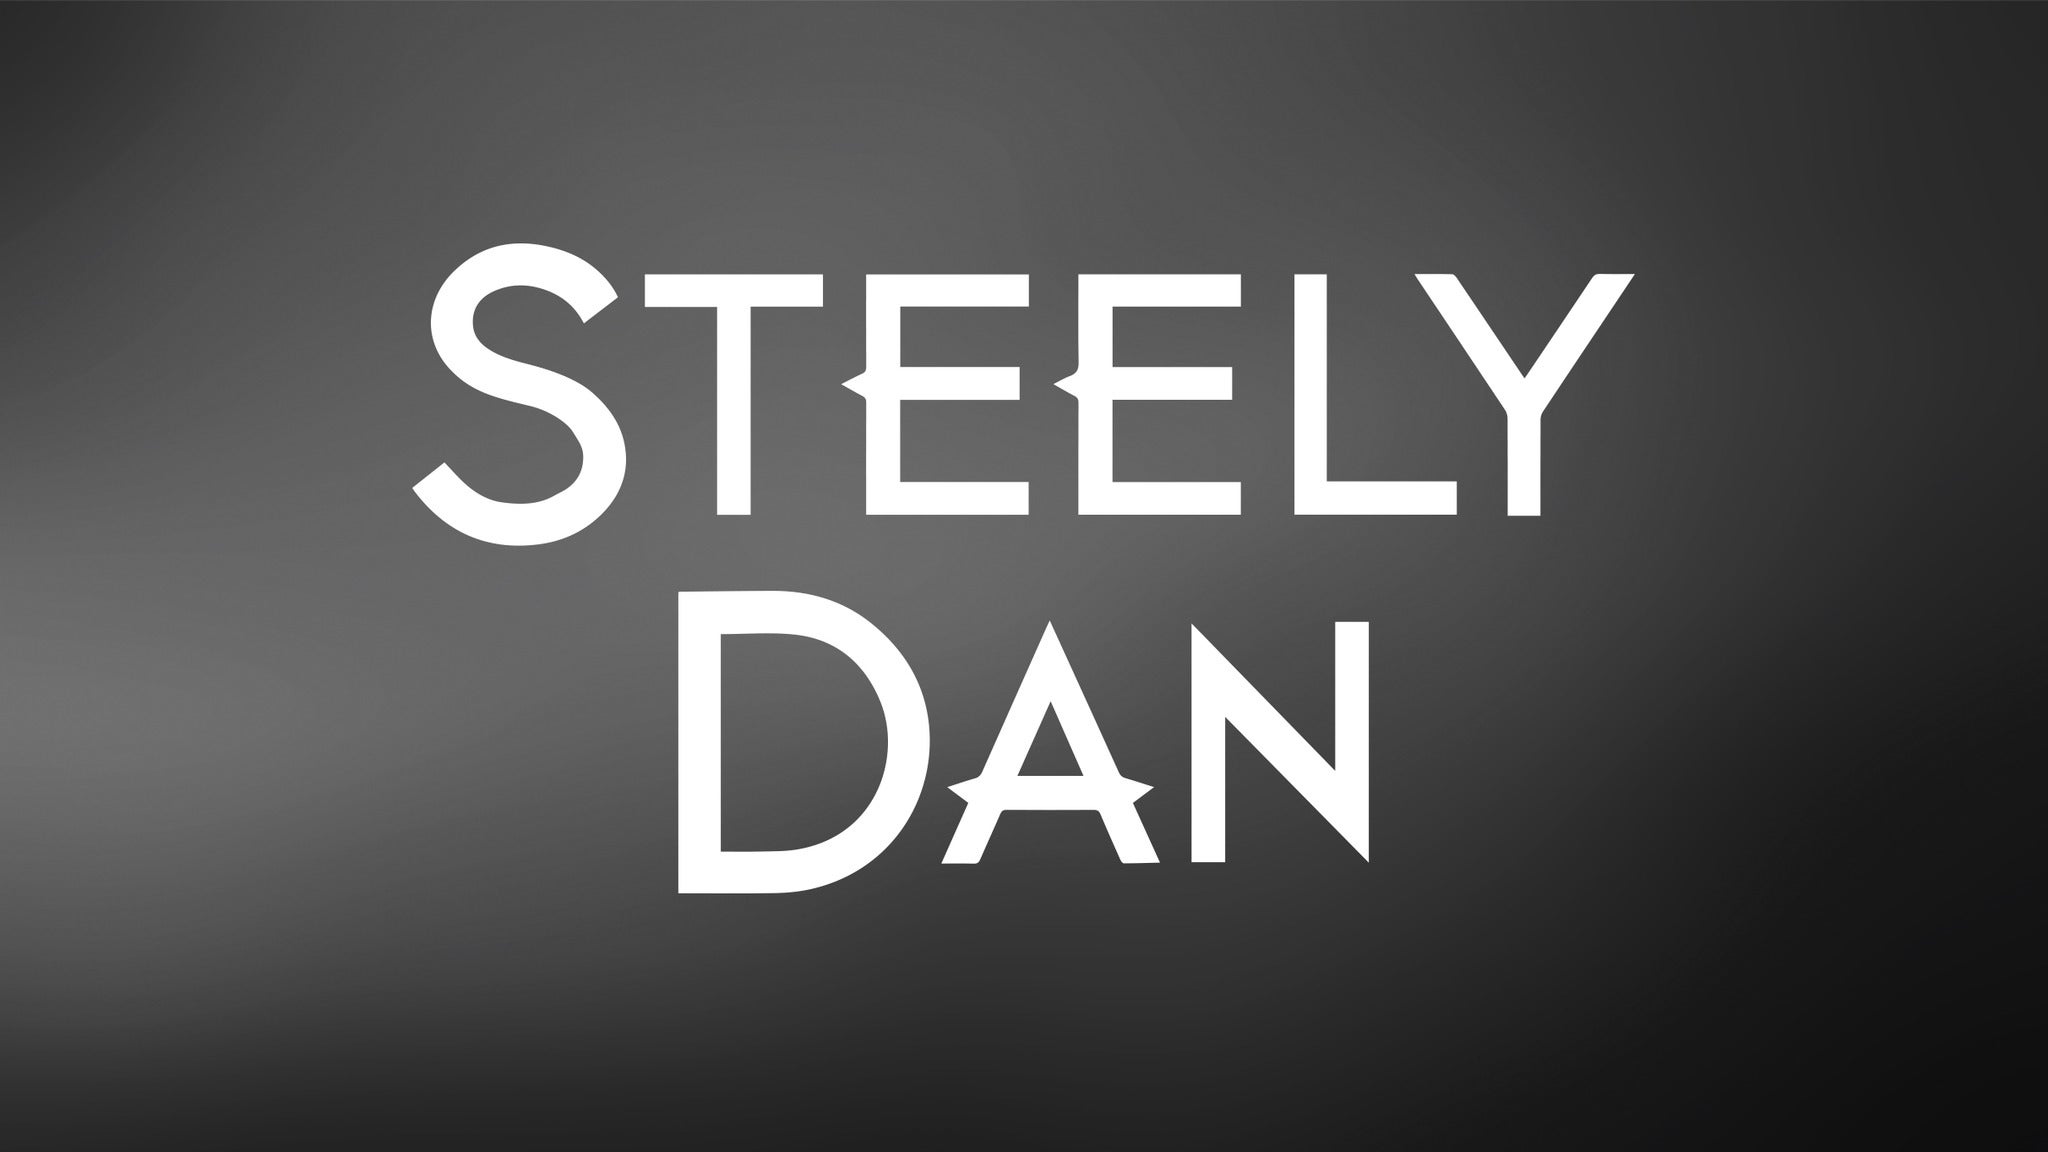 Steely Dan- The Absolutely Normal Tour in Syracuse event information